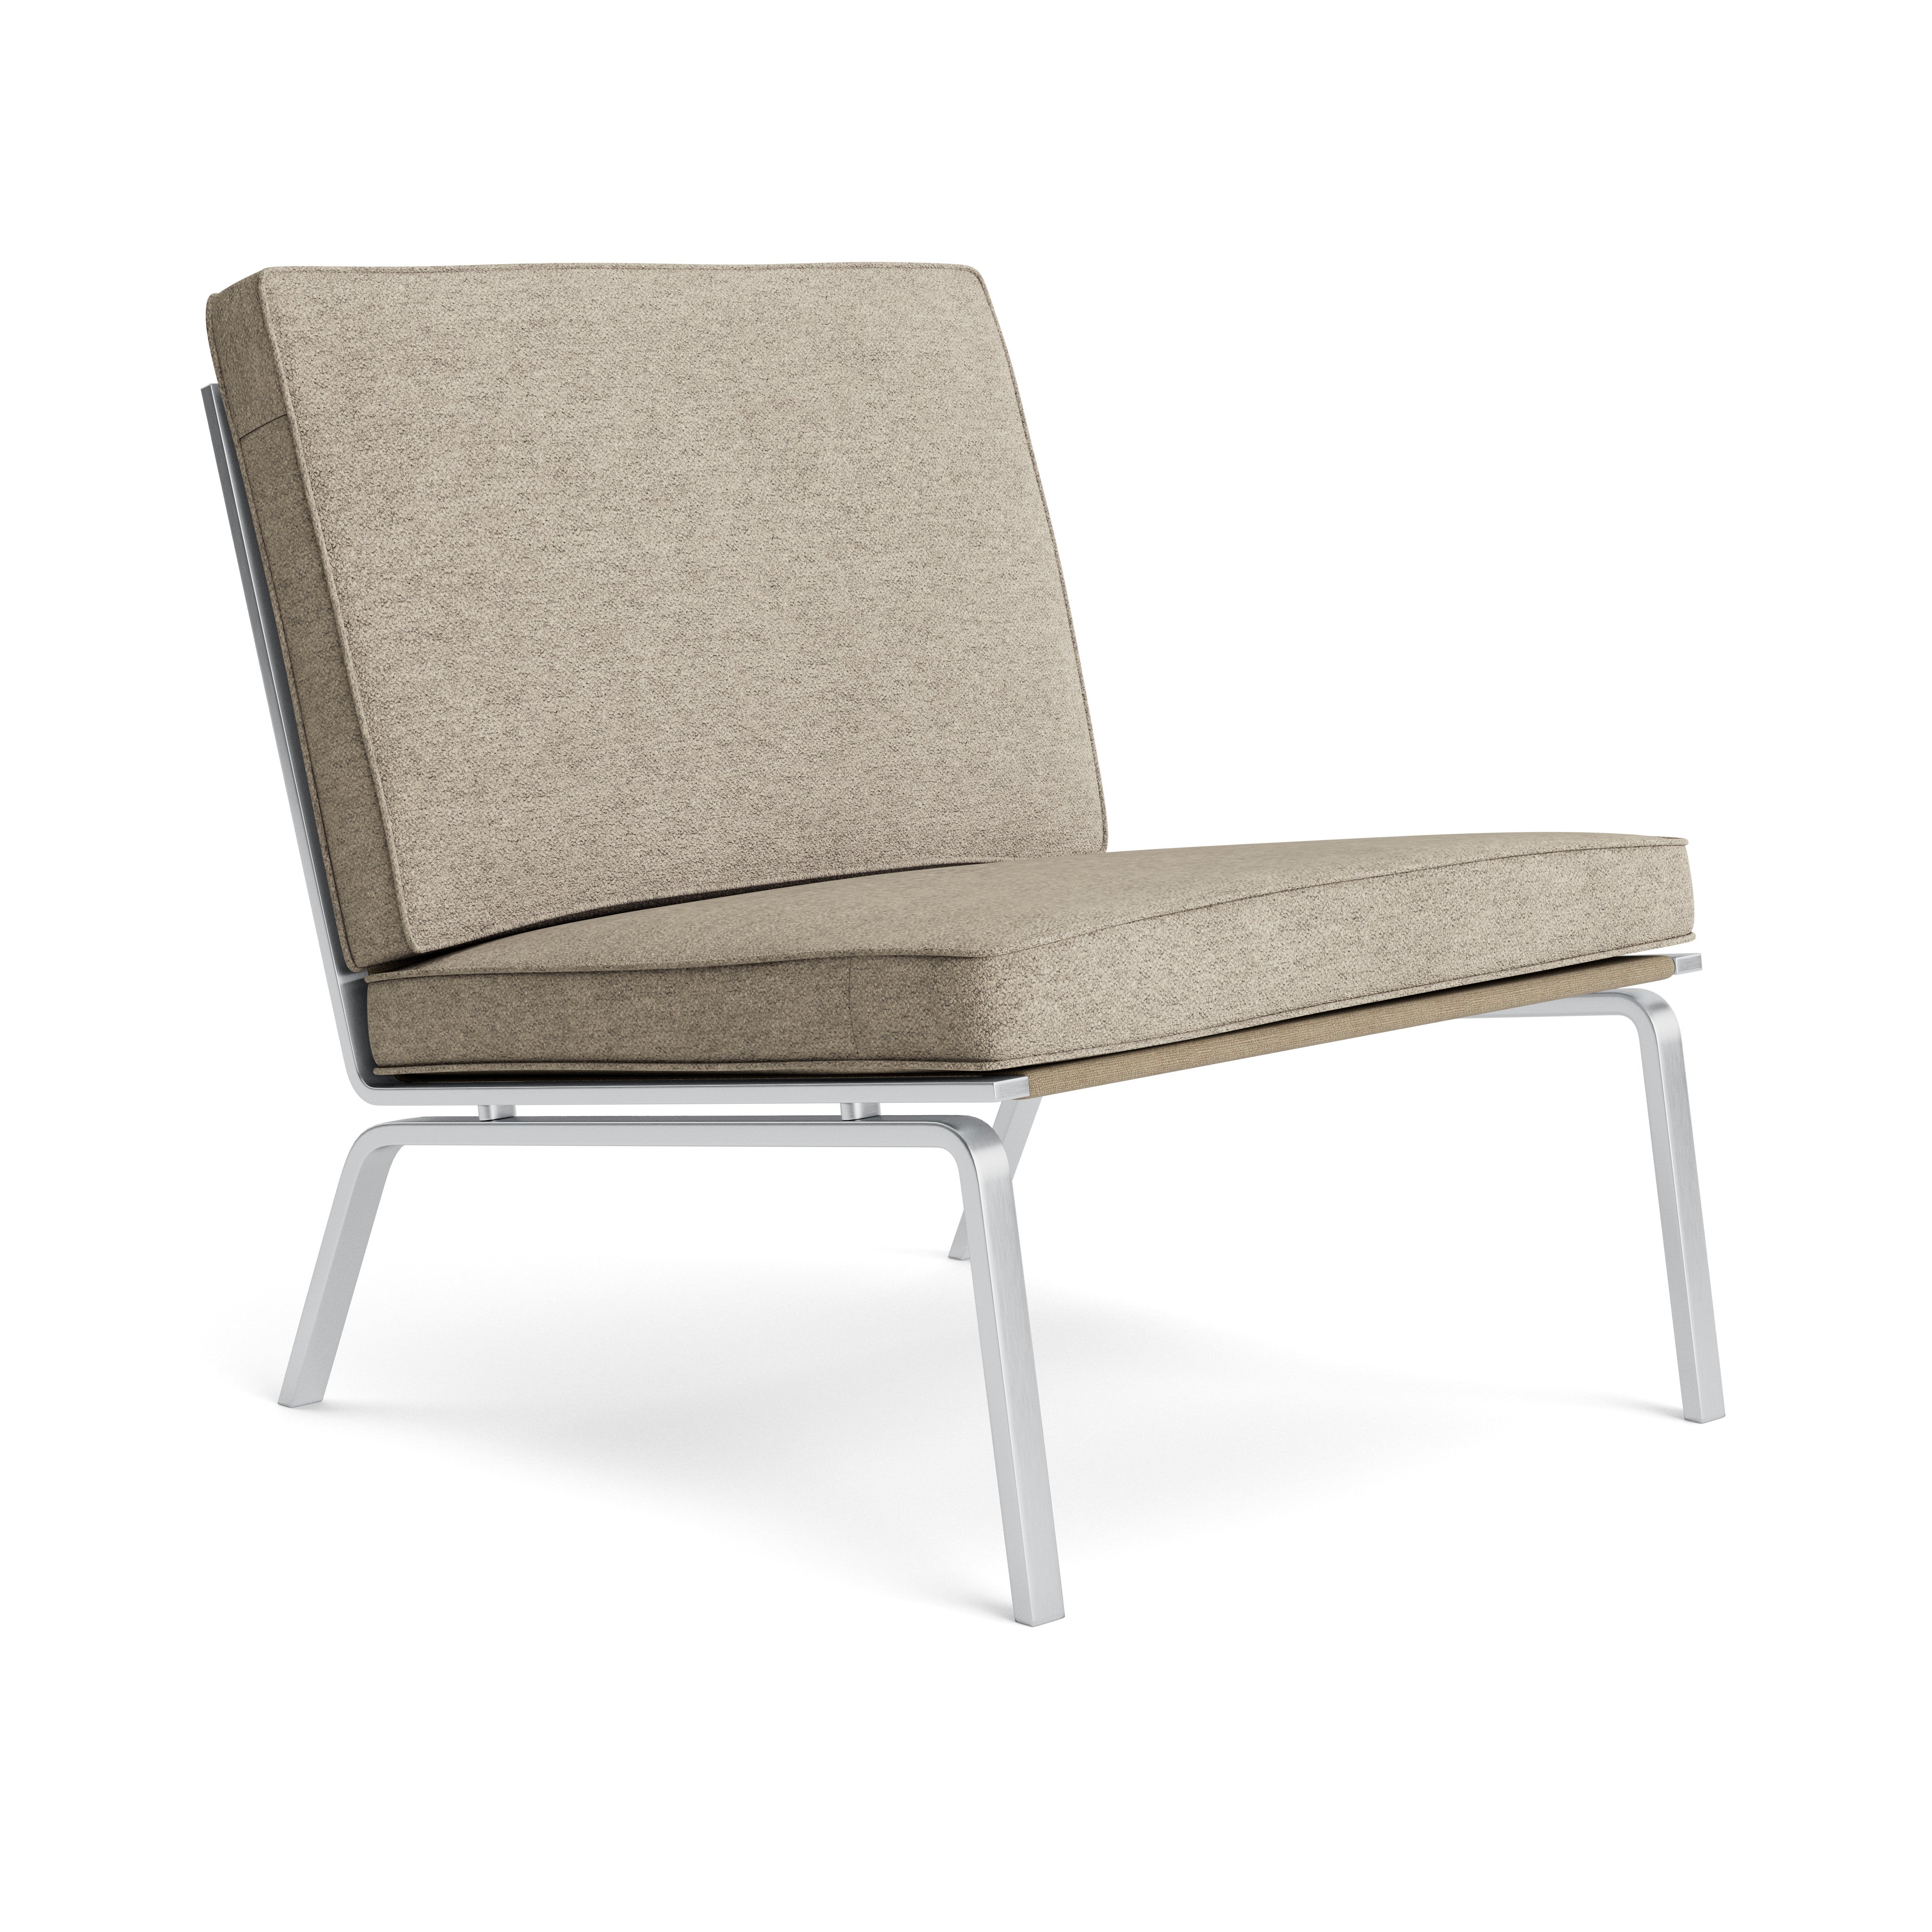 NORR11 Man Lounge Chair